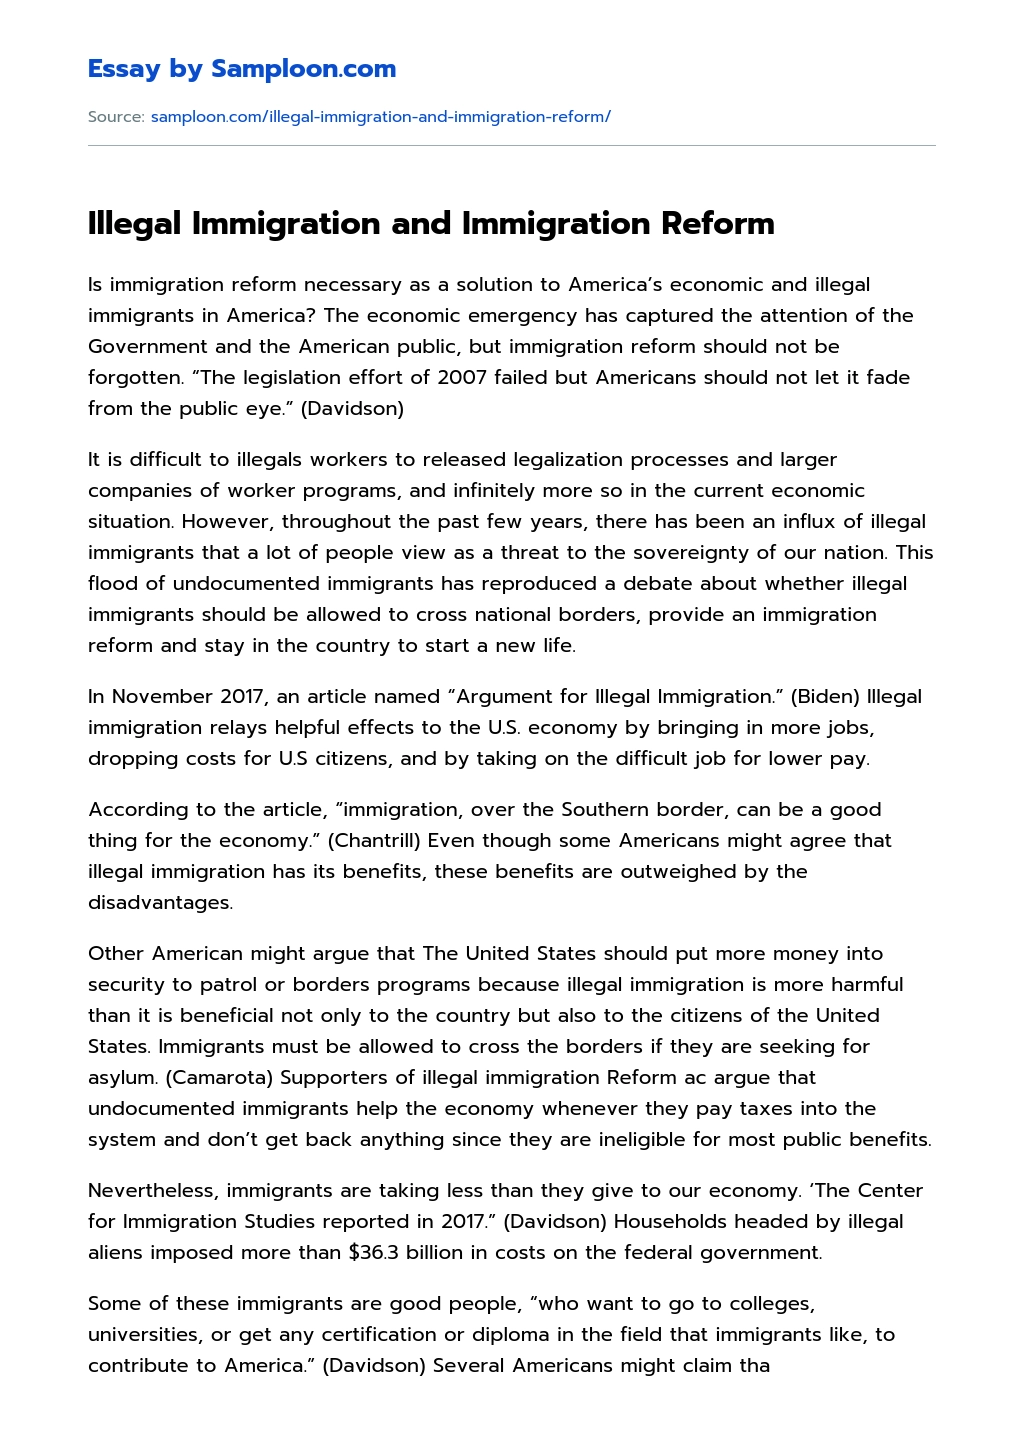 Illegal Immigration and Immigration Reform essay